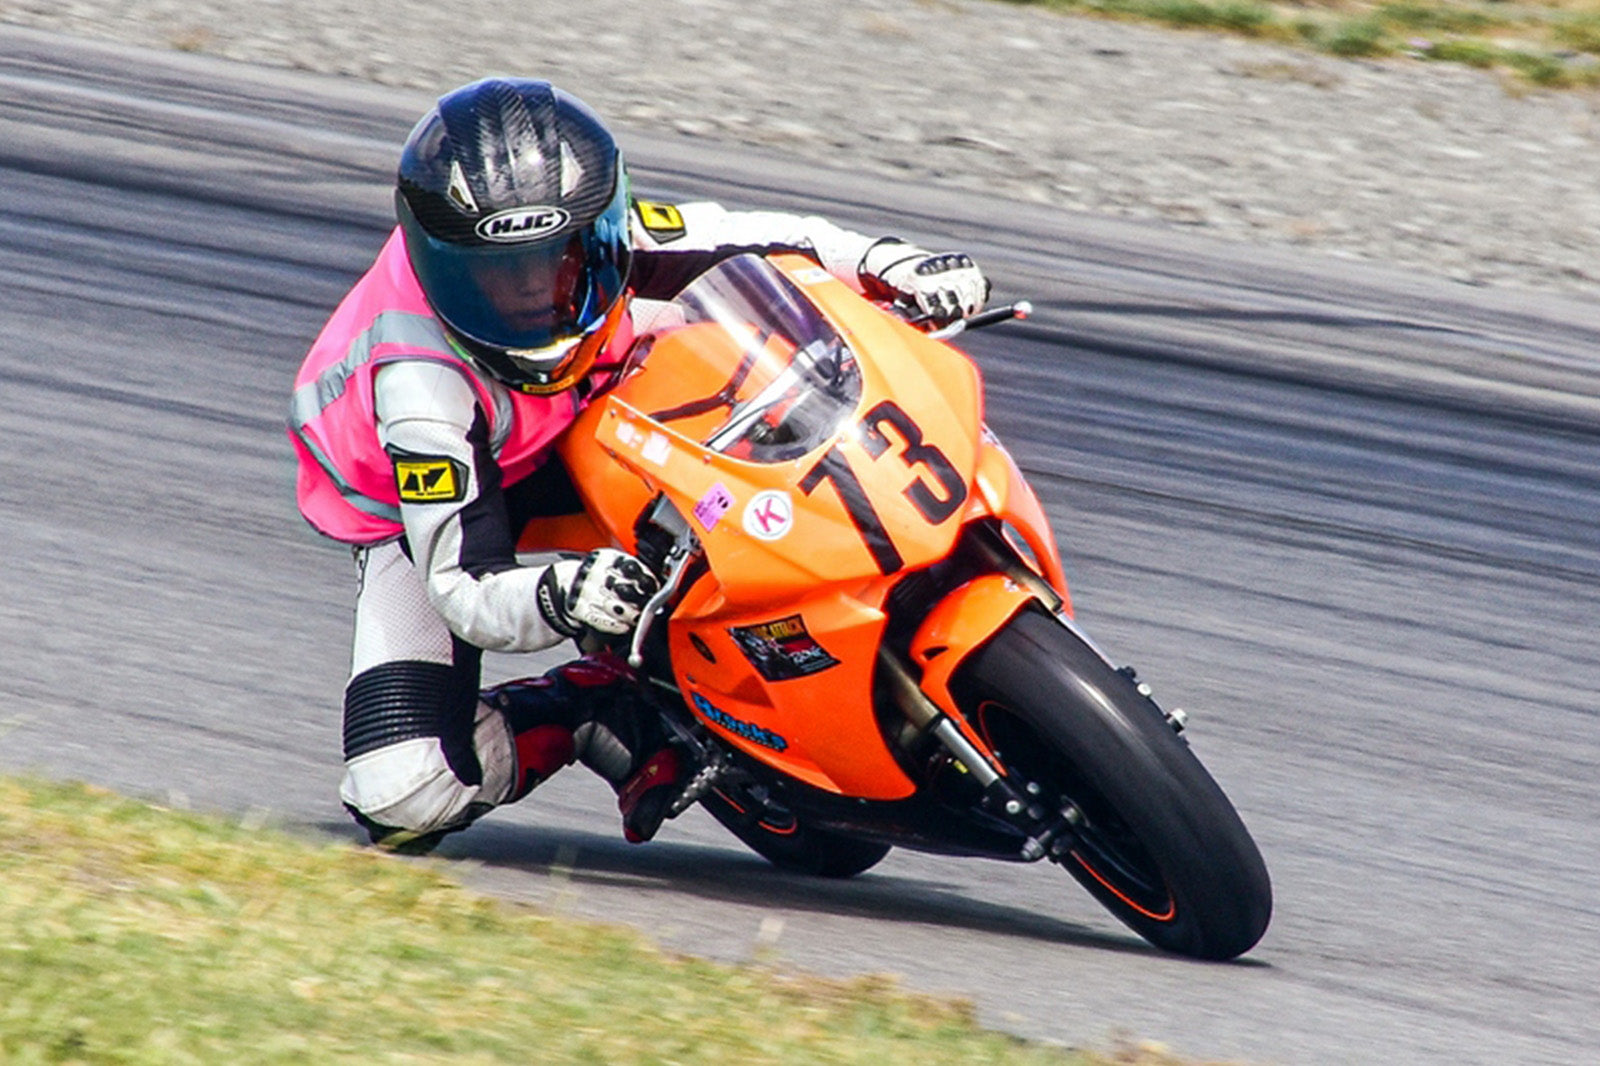 MOTORCYCLING NZ THRILLED TO SUPPORT KAYO GP